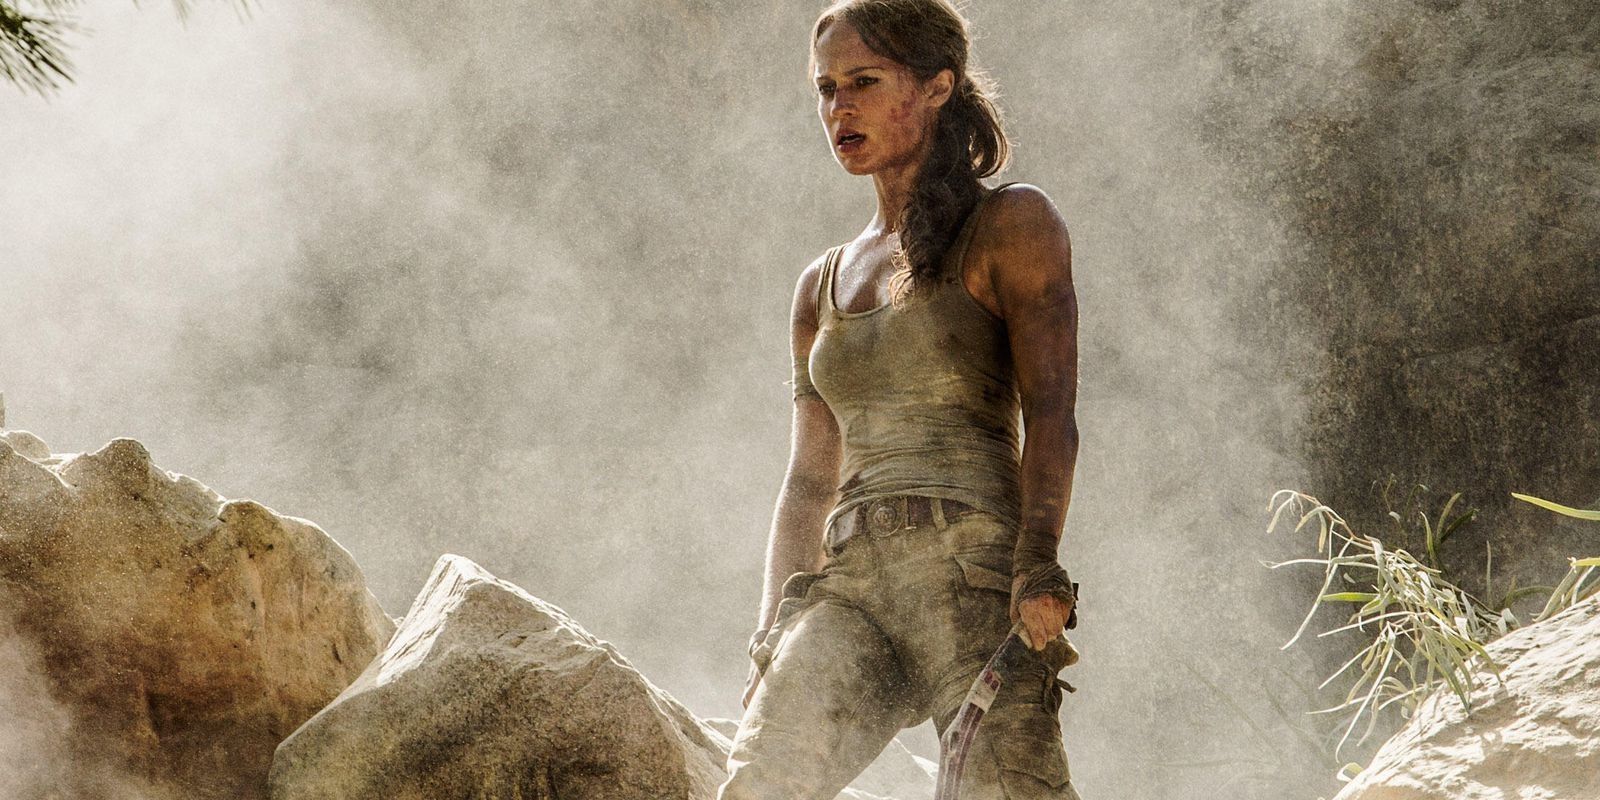 Tomb Raider 2 with Alicia Vikander in development with writer Amy Jump